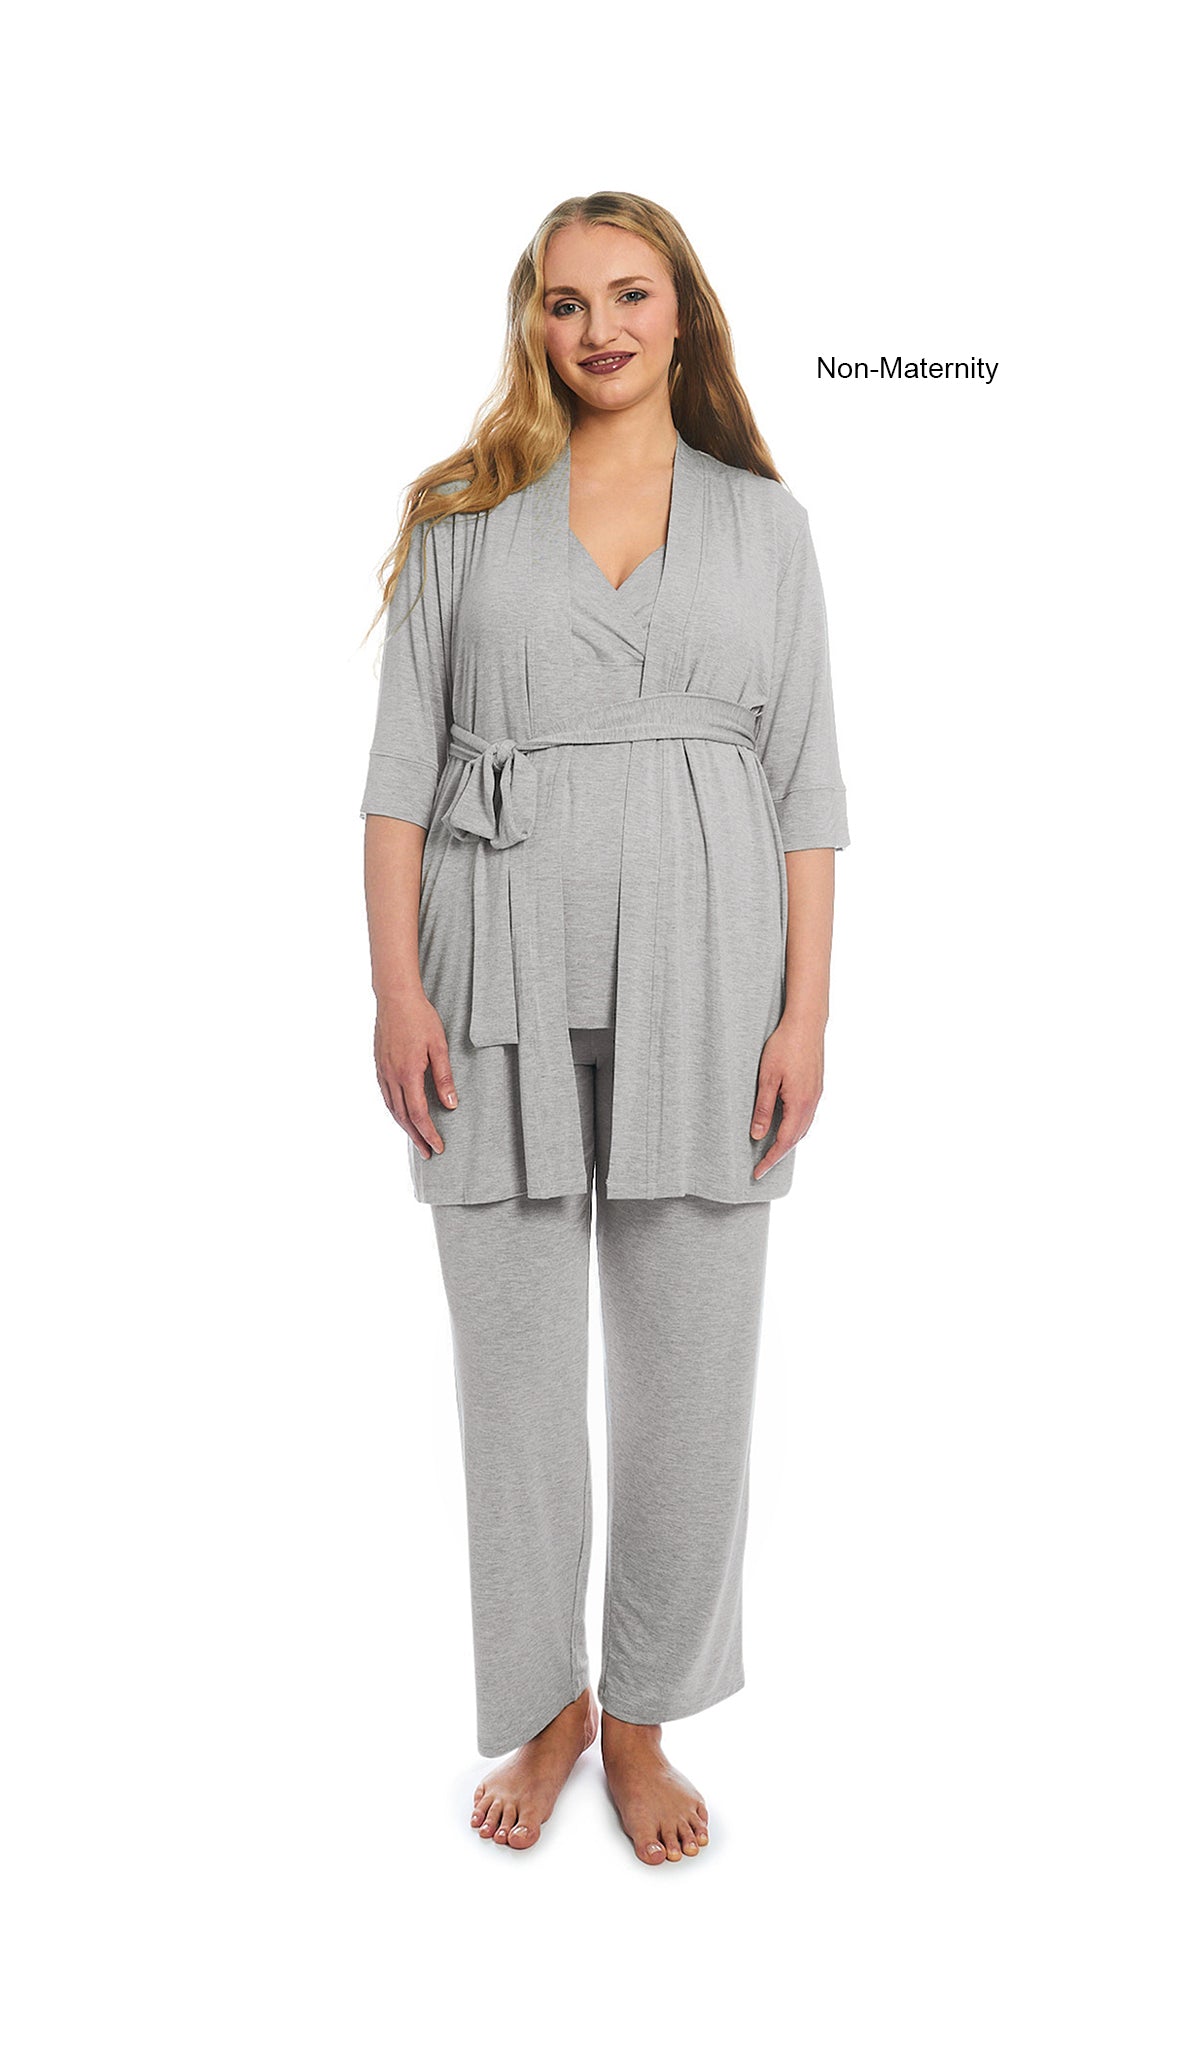 Heather Grey Solid Analise 3-Piece Set. Woman wearing 3/4 sleeve robe, tank top and pant as non-maternity.